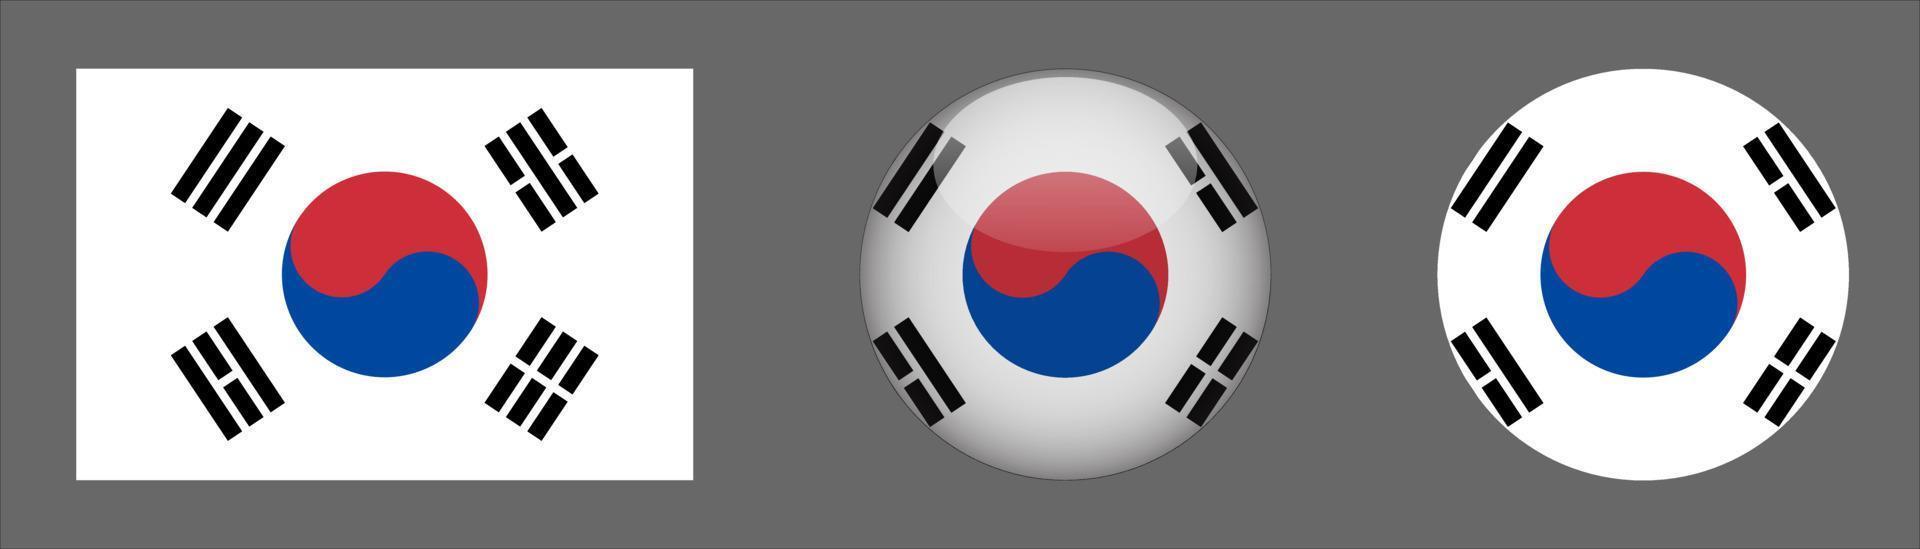 South Korea Flag Set Collection, Original Size Ratio, 3D Rounded and Flat Rounded. vector